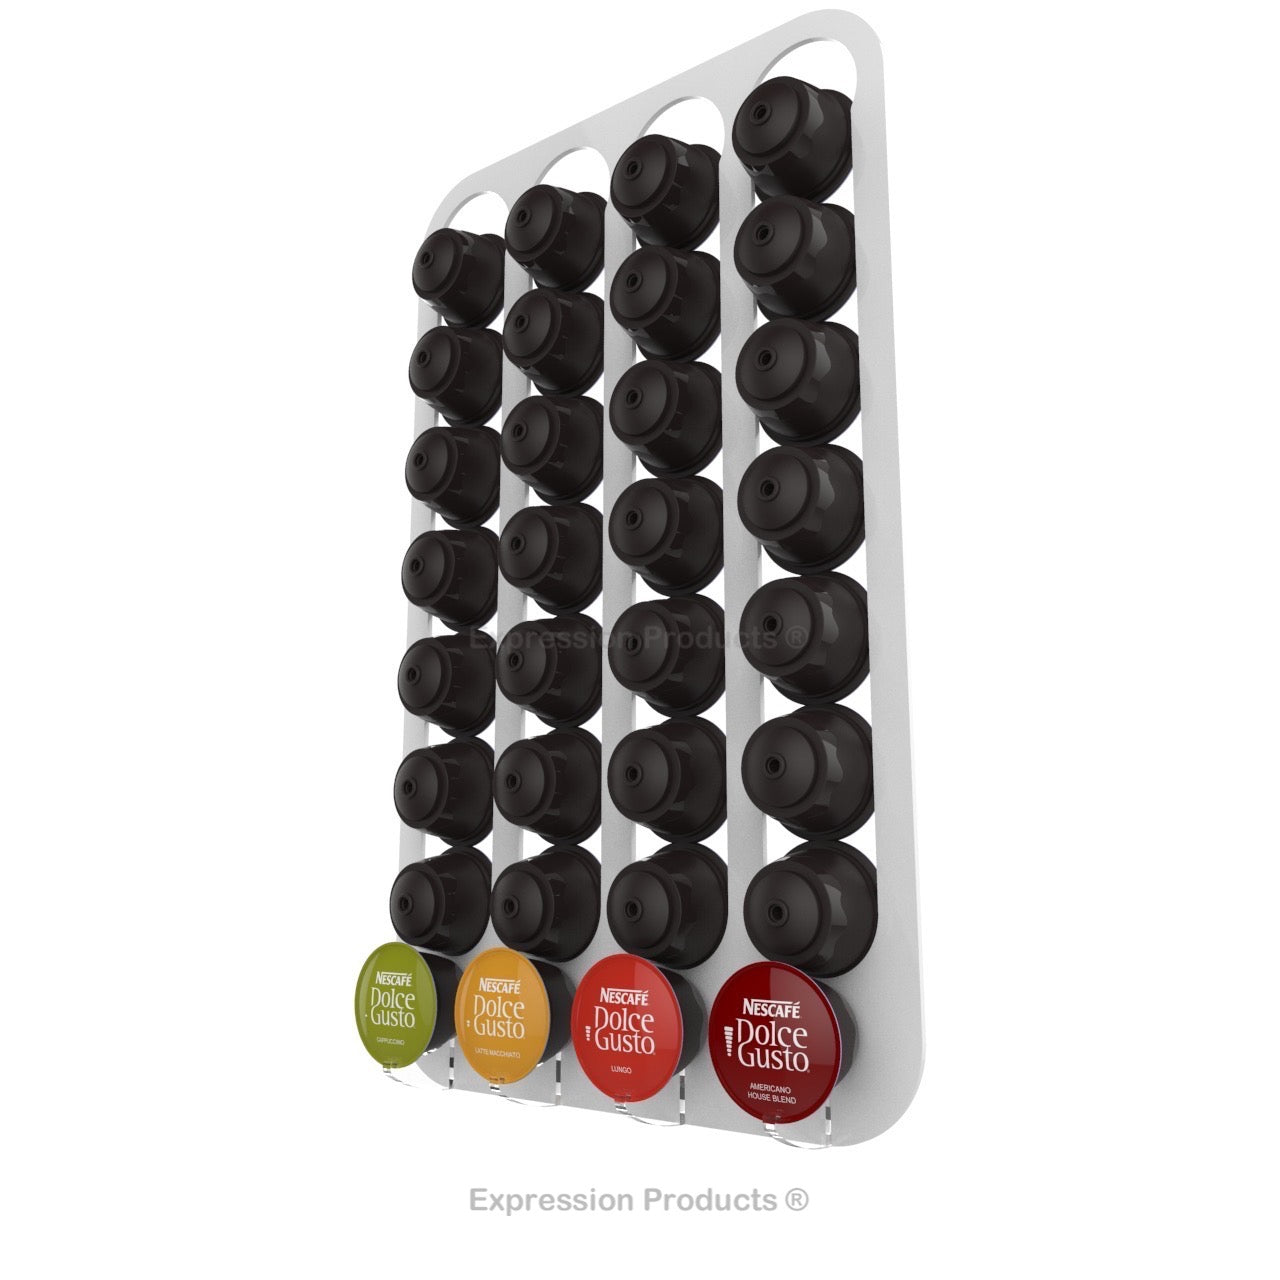 Dolce Gusto Coffee Pod Holder, Wall Mounted.  Shown in White Holding 32 Pods